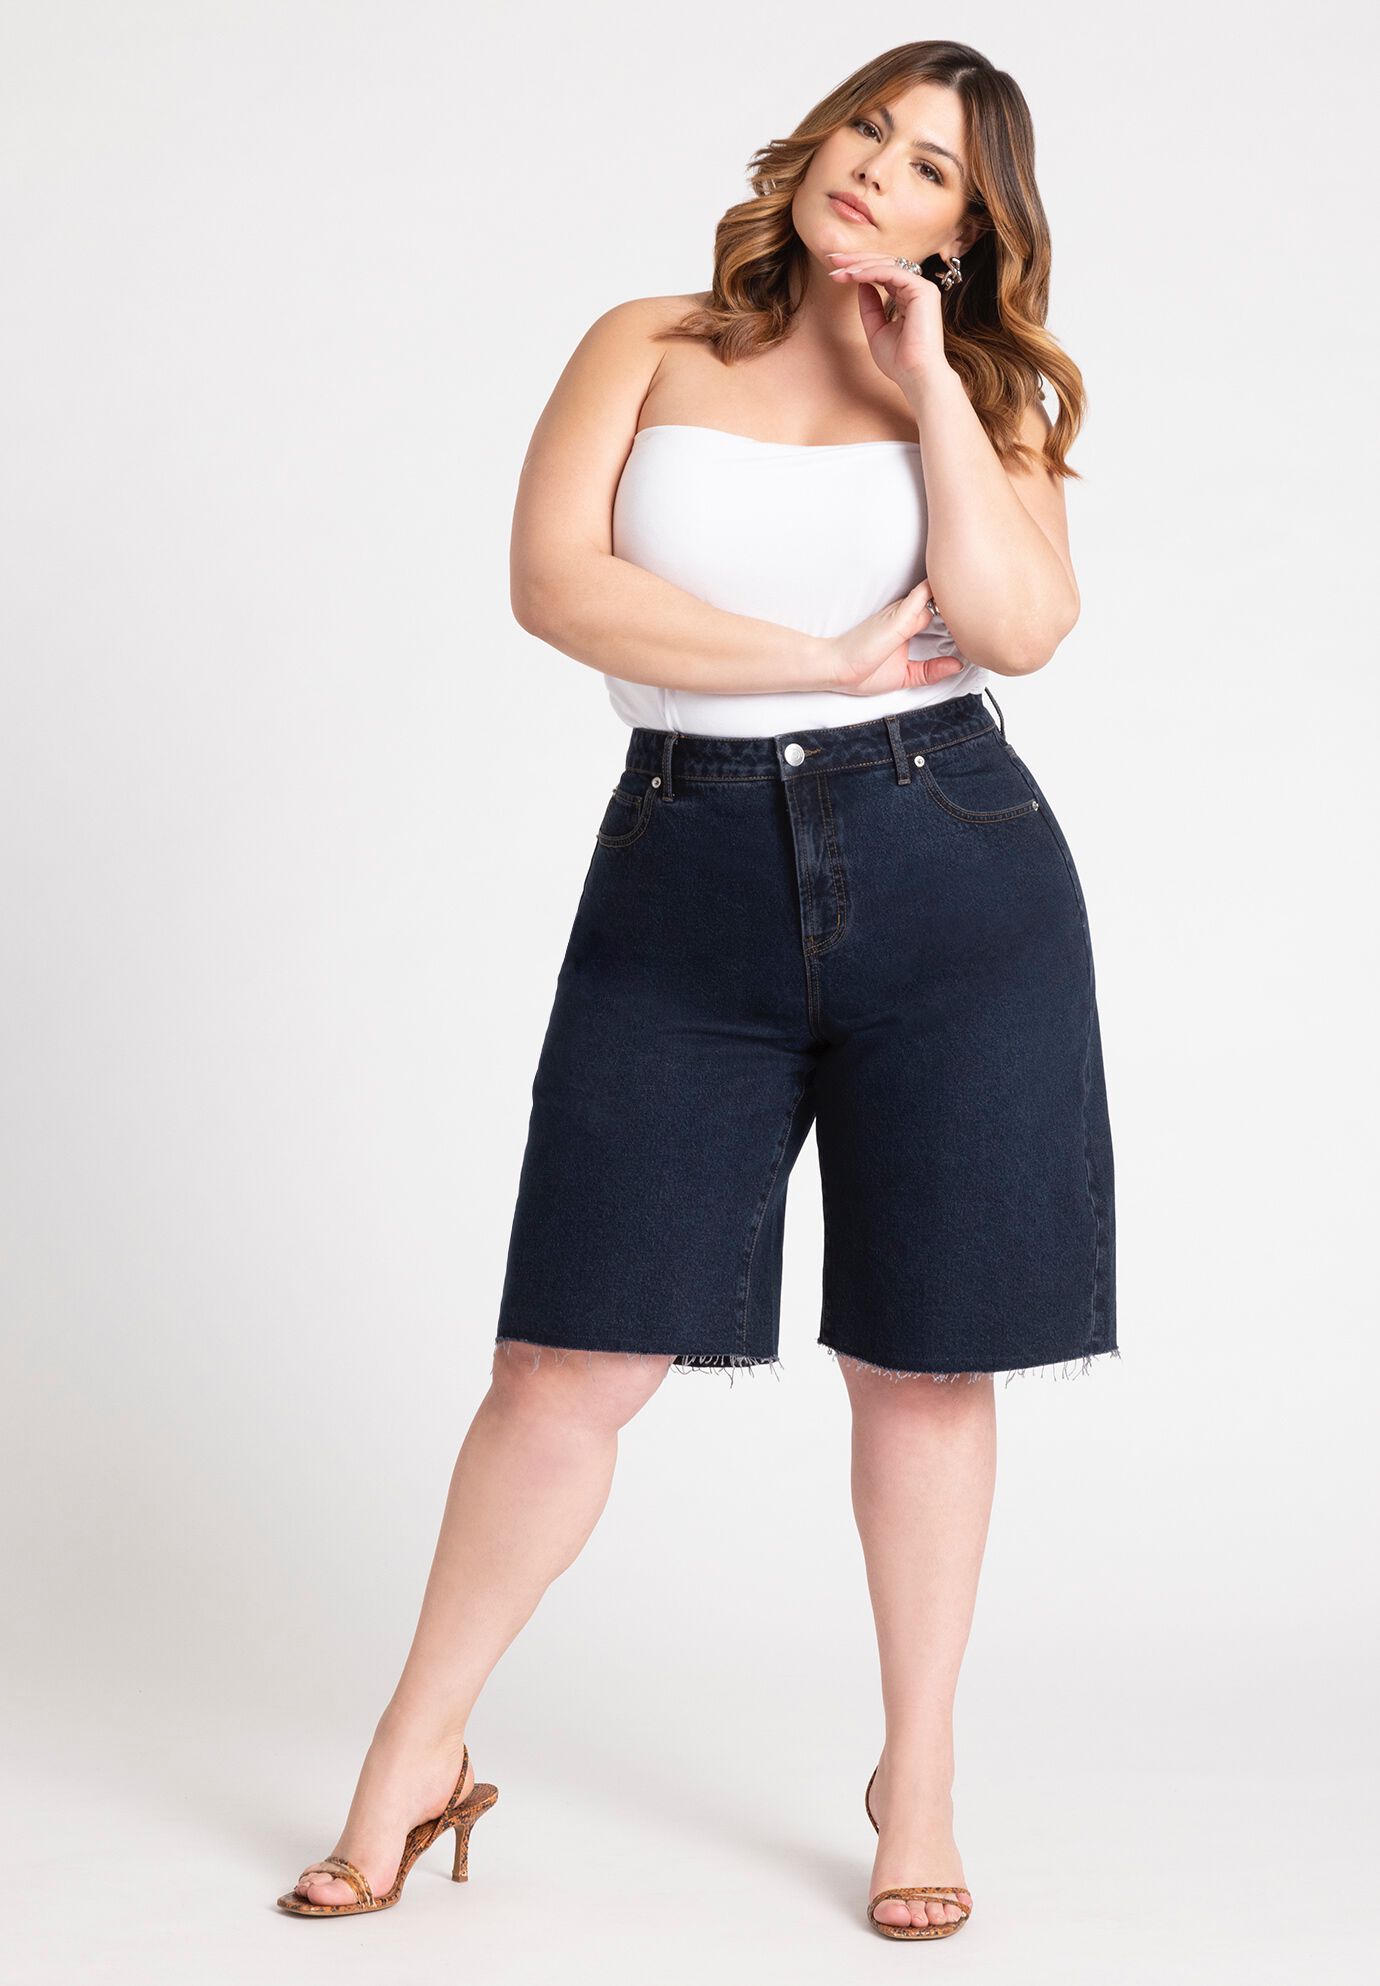 model wears dark long denim short and white top with a brown heel